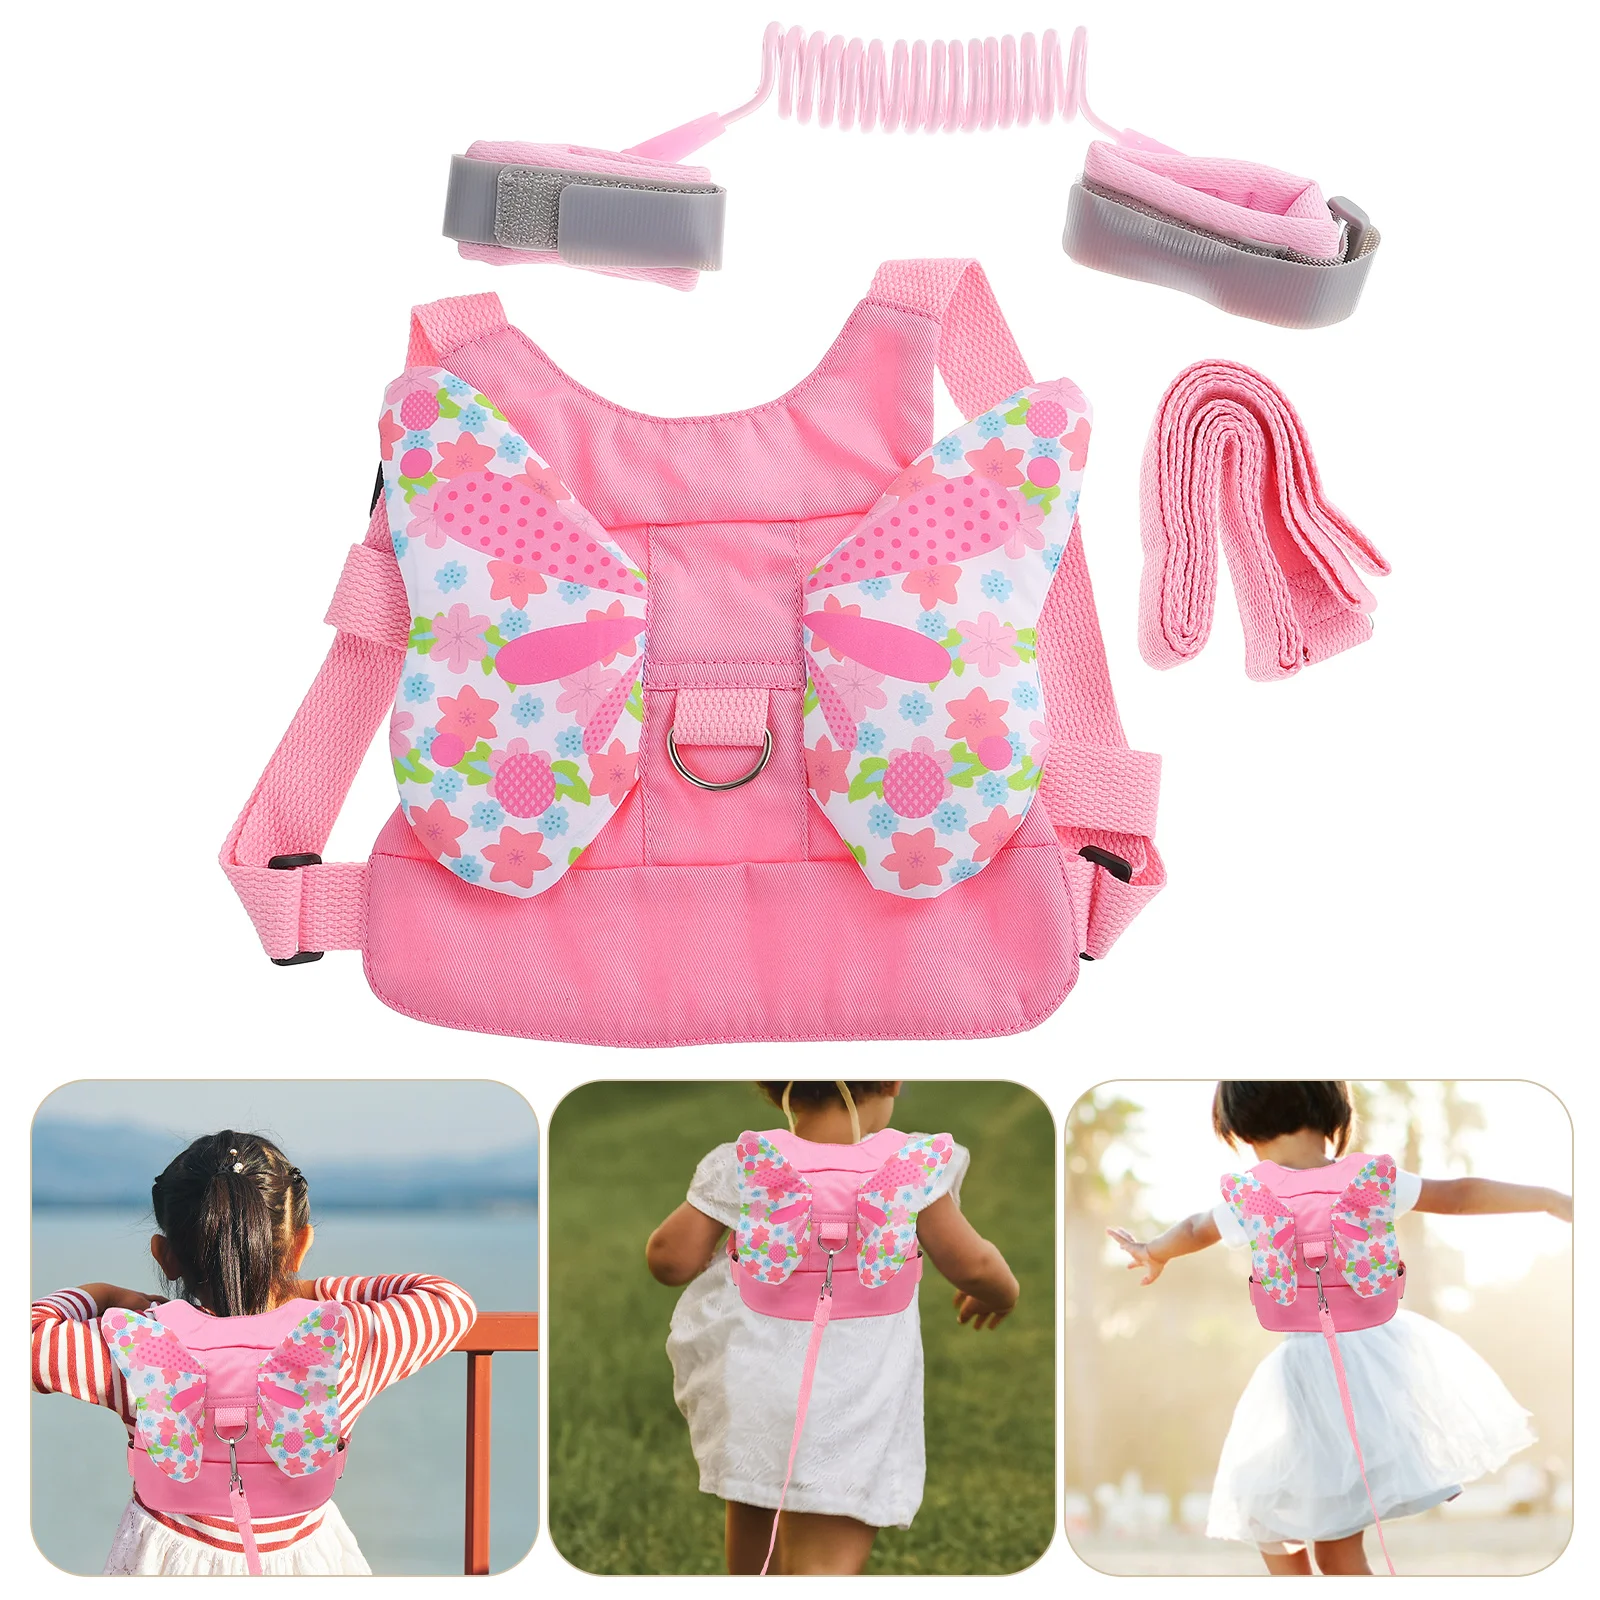 Children's Anti-lost Strap Kids Leash Toddler Baby Harness Backpack Portable Walking Outdoor